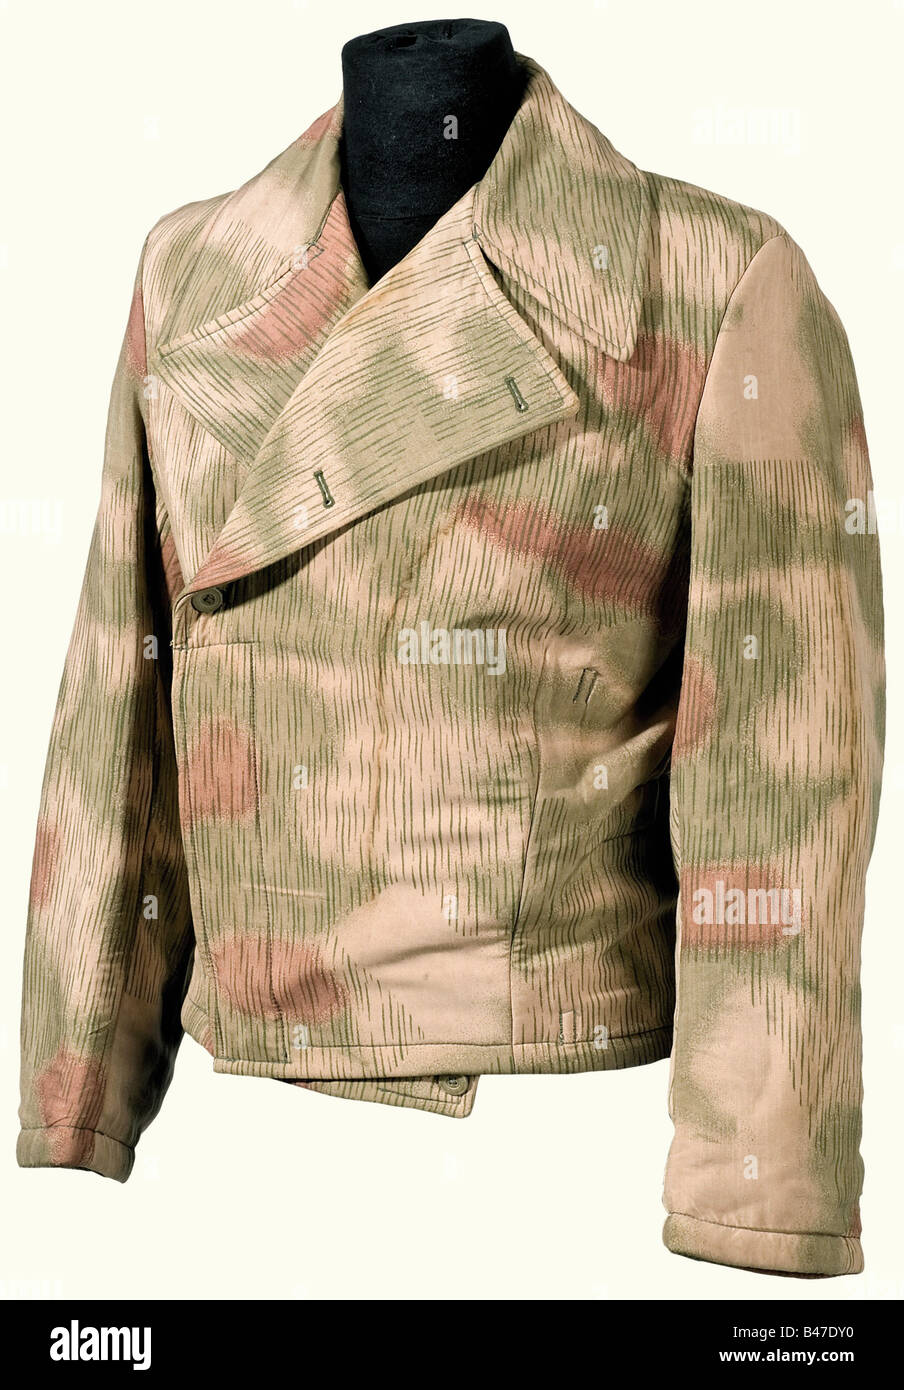 A camouflage jacket, in the special uniform style for tank troops. Swamp camouflage version, with white interior, but not reversible. Padded. Pressed cardboard buttons. Size, RB No. and LBA Stamp. The eagle has been detached. Stained. historic, historical, 1930s, 20th century, Air Force, branch of service, branches of service, armed service, armed services, military, militaria, air forces, object, objects, stills, clipping, clippings, cut out, cut-out, cut-outs, uniform, uniforms, outfit, outfits, textile, clothes, Stock Photo